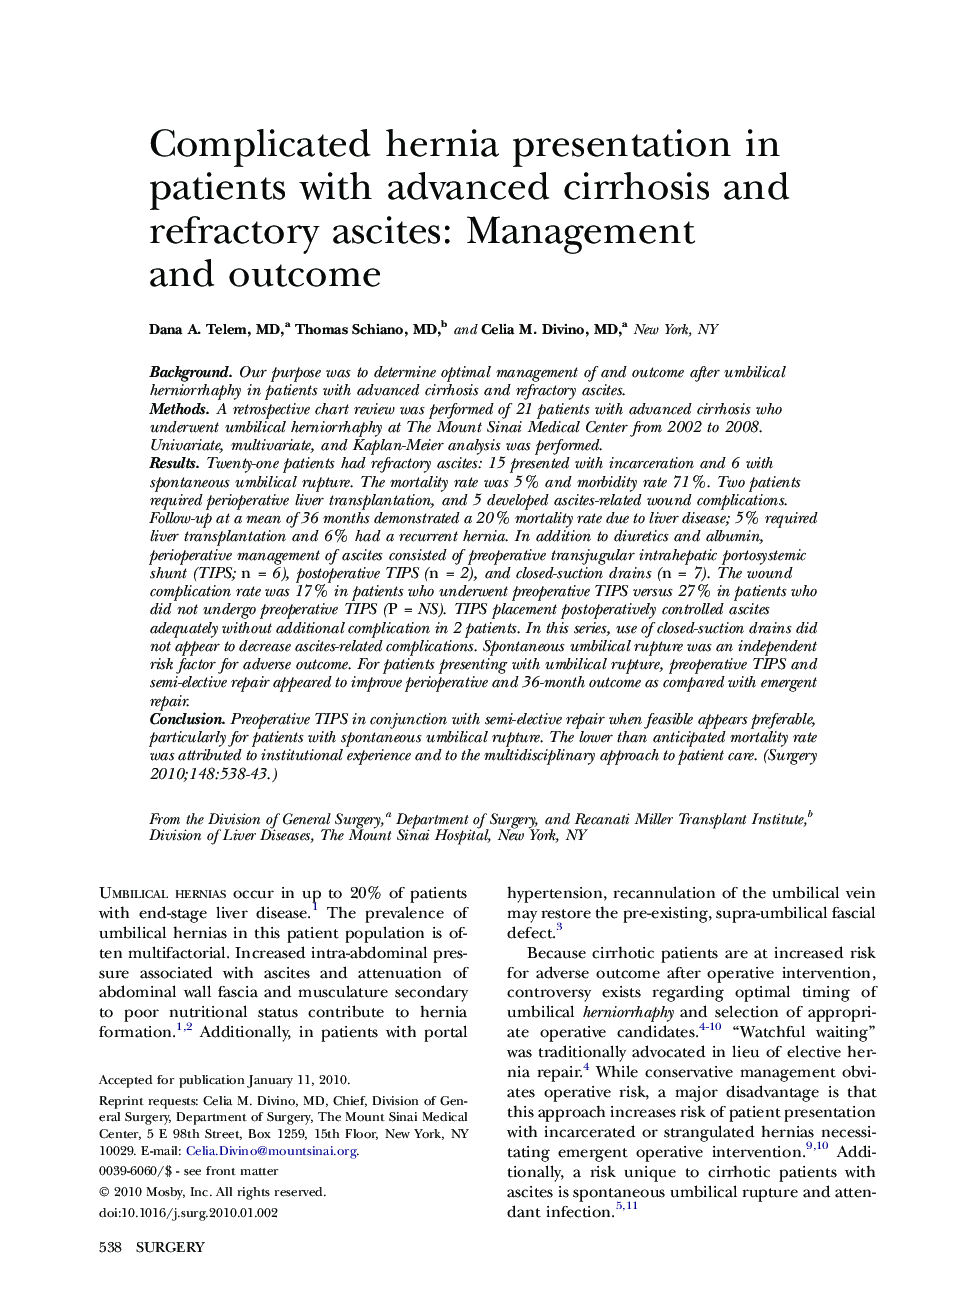 Complicated hernia presentation in patients with advanced cirrhosis and refractory ascites: Management and outcome